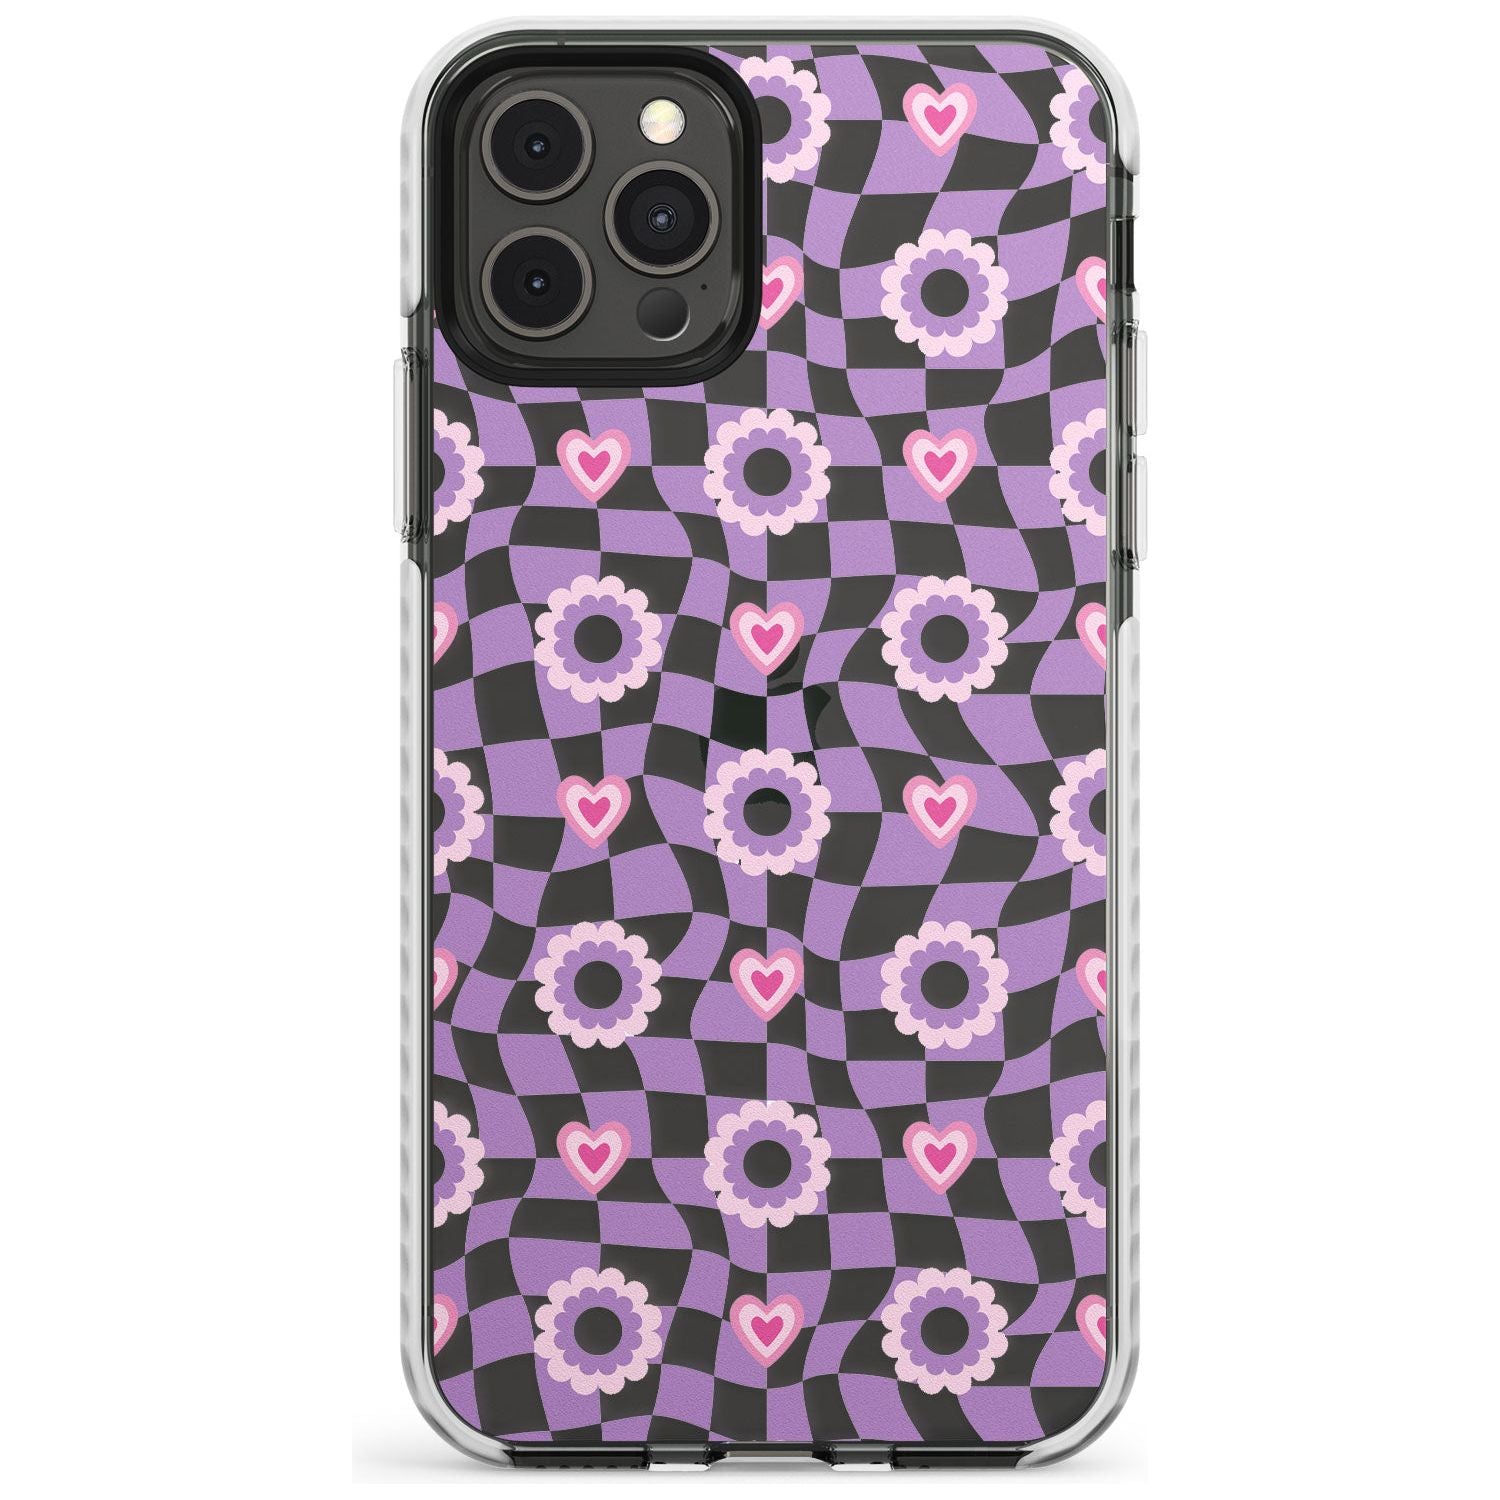 Checkered Love Pattern Impact Phone Case for iPhone 11 Pro Max